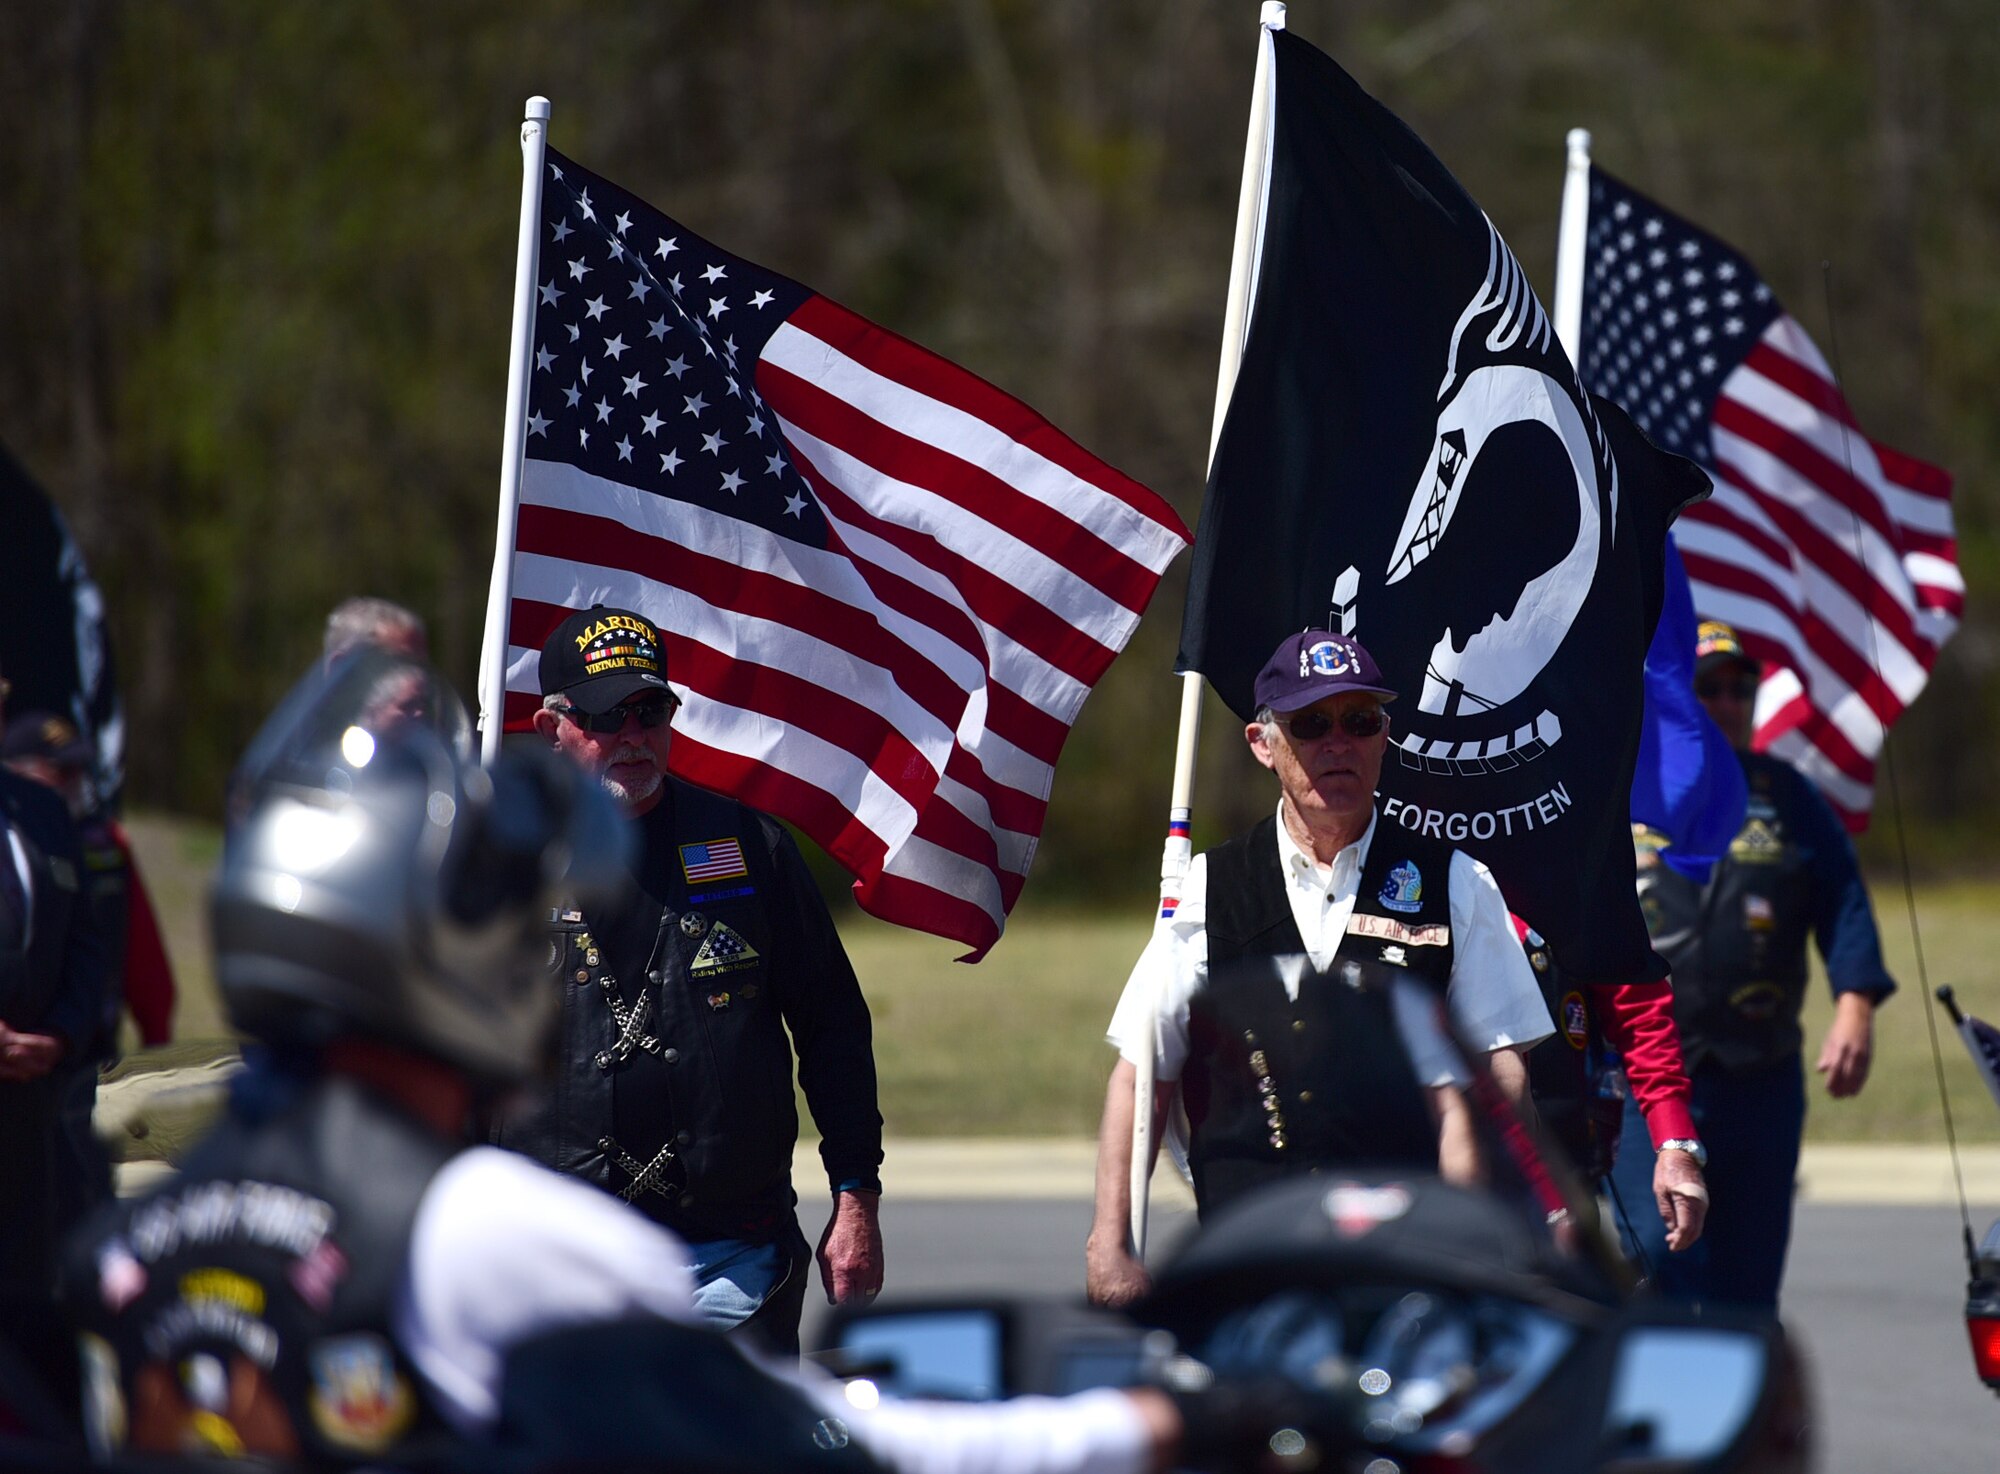 Patriot Guard Riders of North Carolina attend the funeral ceremony for Col. Edgar Davis April 6, 2018, in Goldsboro, North Carolina. Davis served as an RF-4C Phantom navigator during the Vietnam War assigned to the 11th Tactical Reconnaissance Squadron. The unit exists today as the 11th Attack Squadron, flying the MQ-9 Reaper. (U.S. Air Force photo by Senior Airman Christian Clausen)